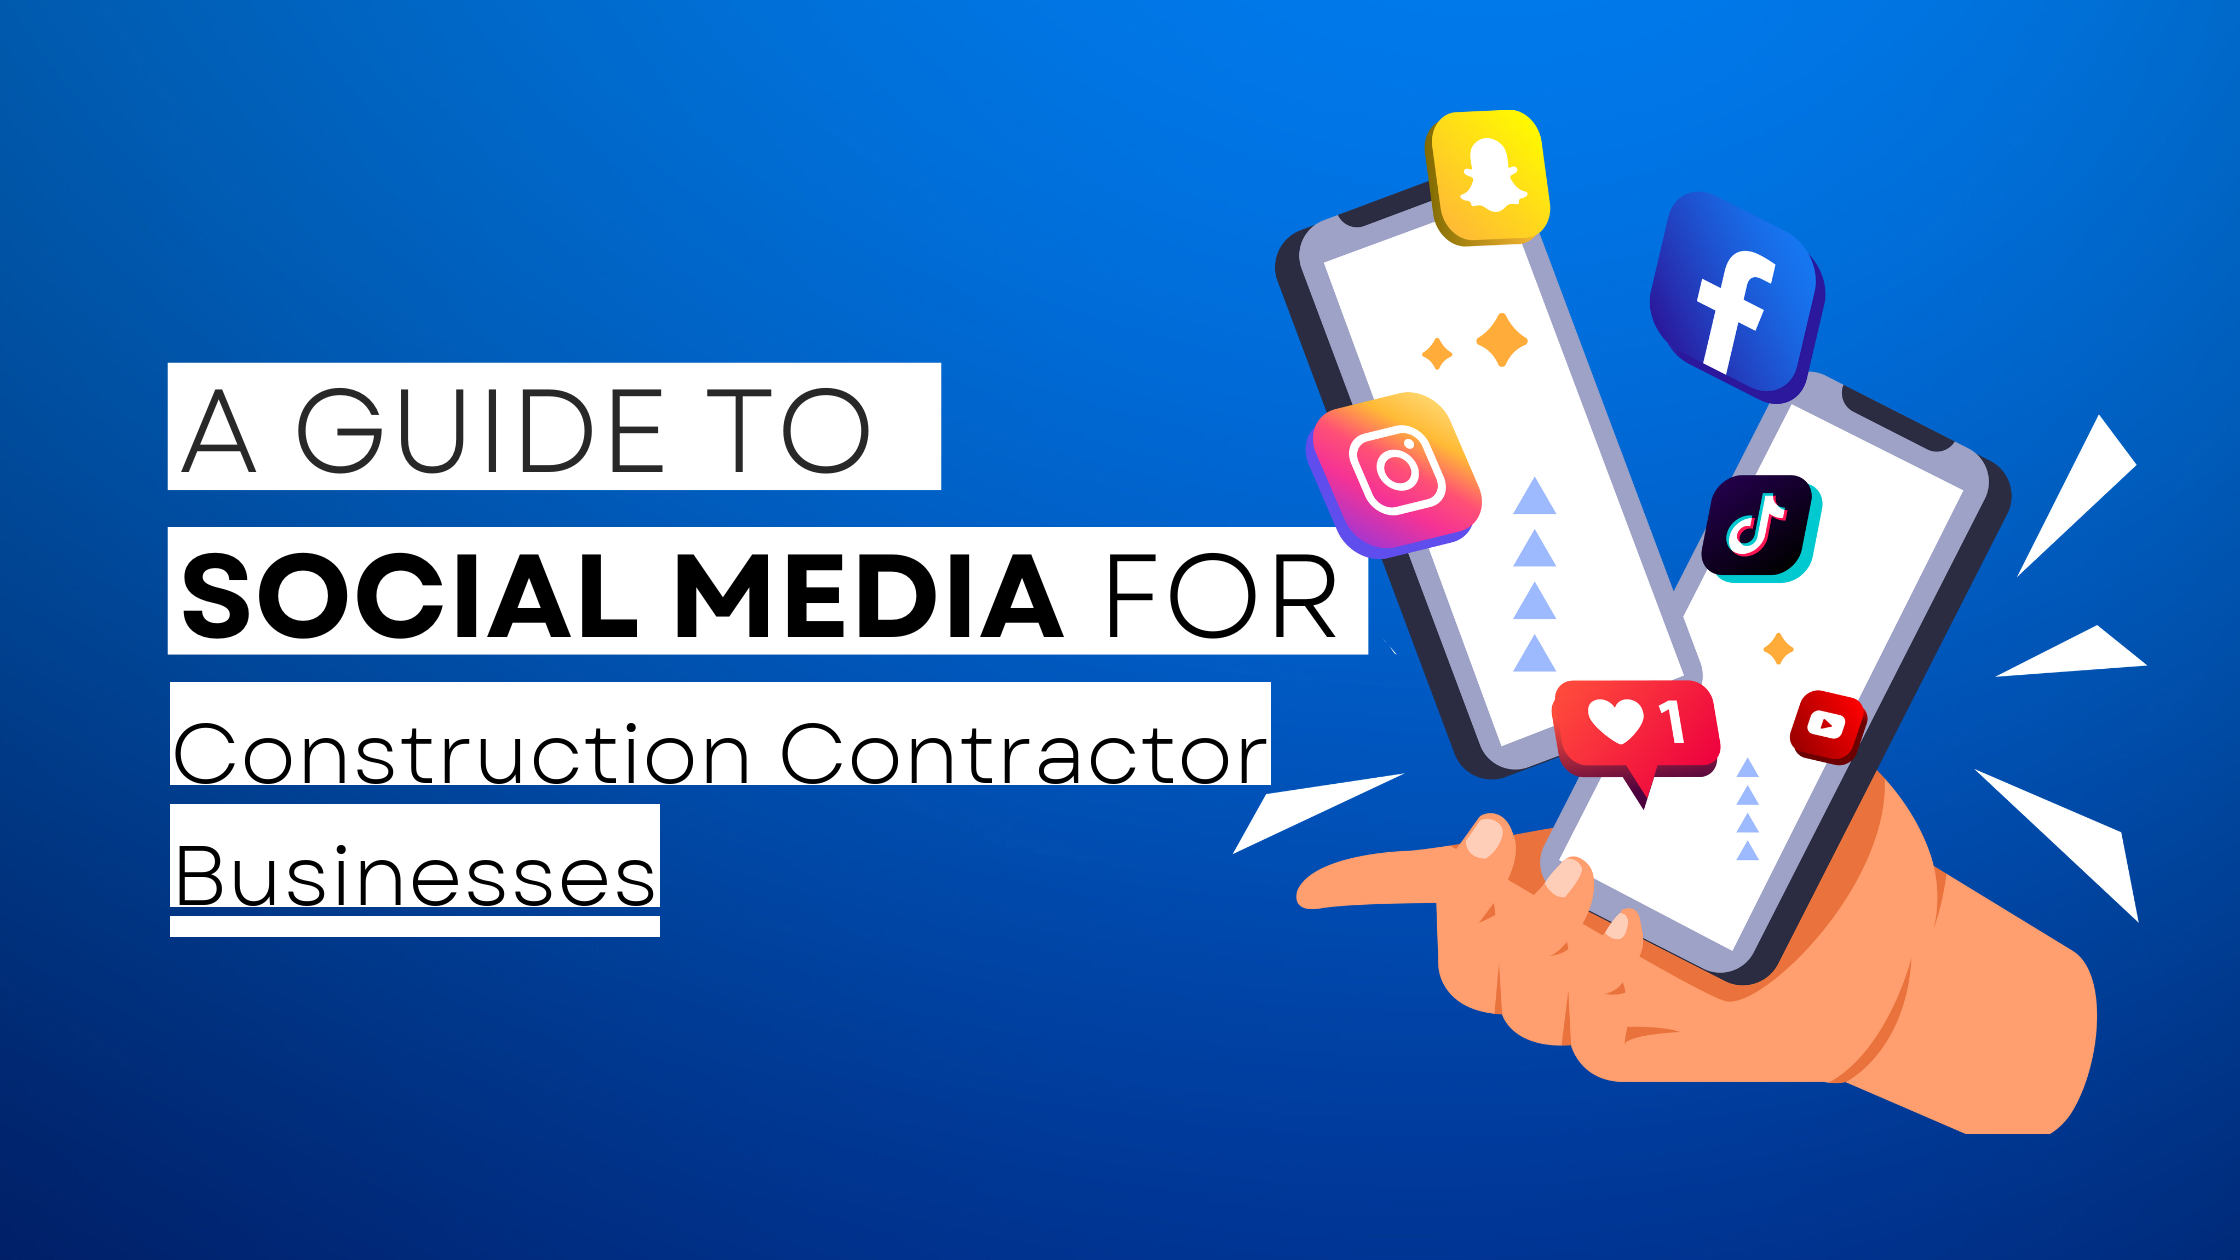 How to start Construction Contractor on social media